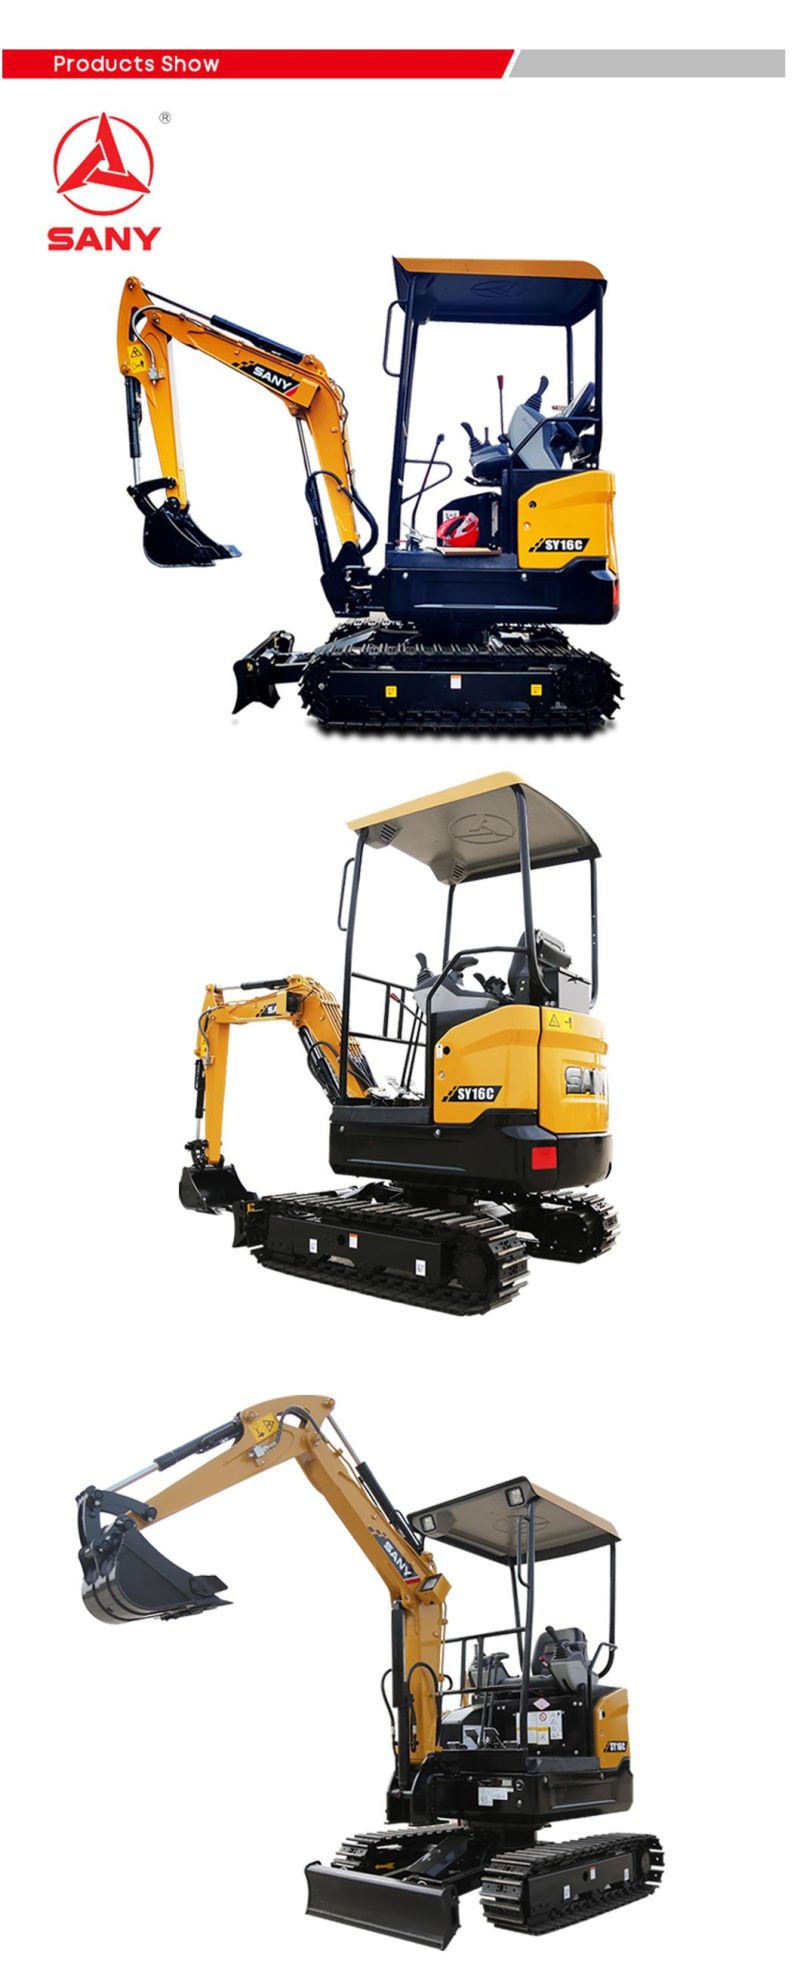 Sany Sy16c Brand New Small Size Mini Digger Hydraulic Mini Crawler Excavator with Rubber Tracked Construction Machines for Sale